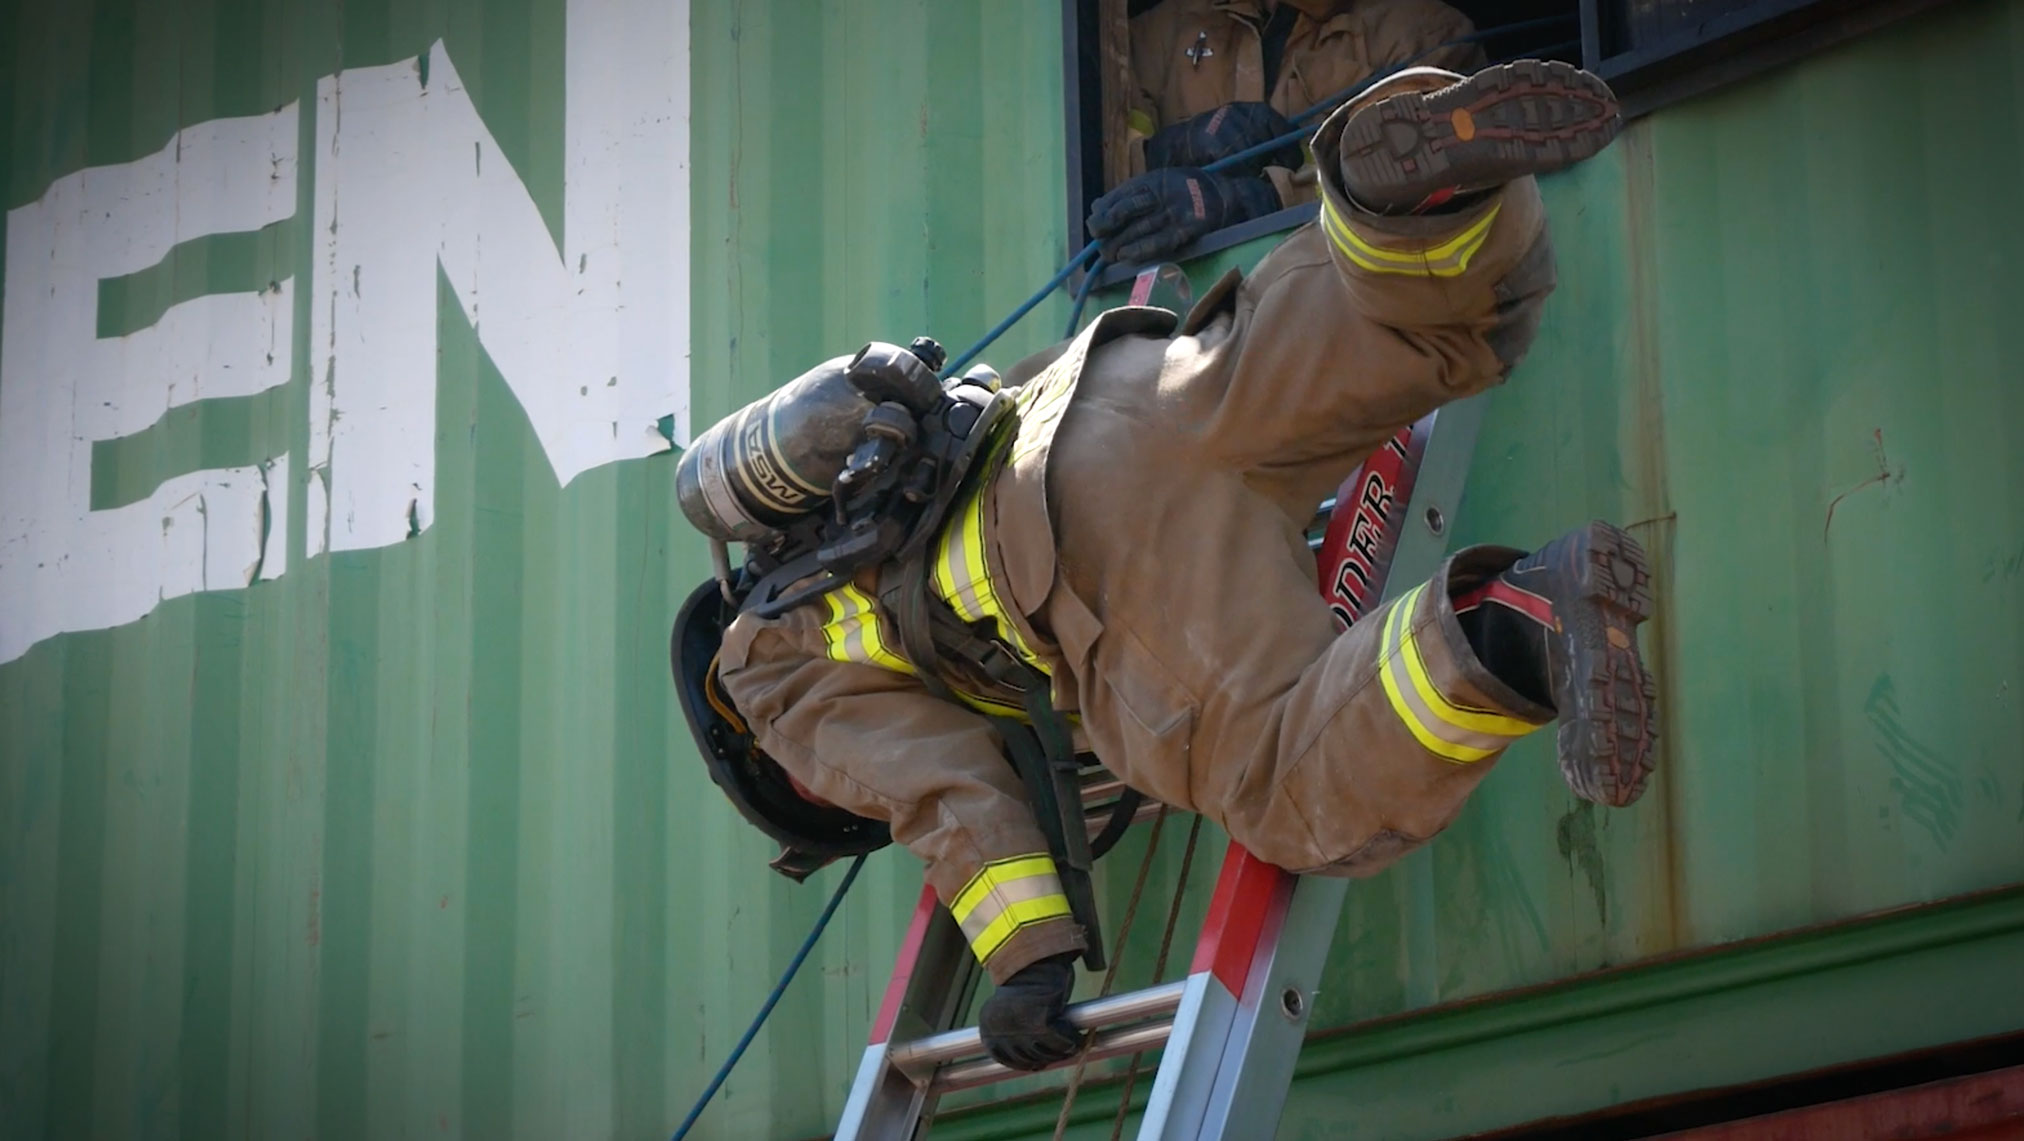 Featured image for “Firefighter Ladder Hook Two Grab Four | Firefighter Bailout Training”